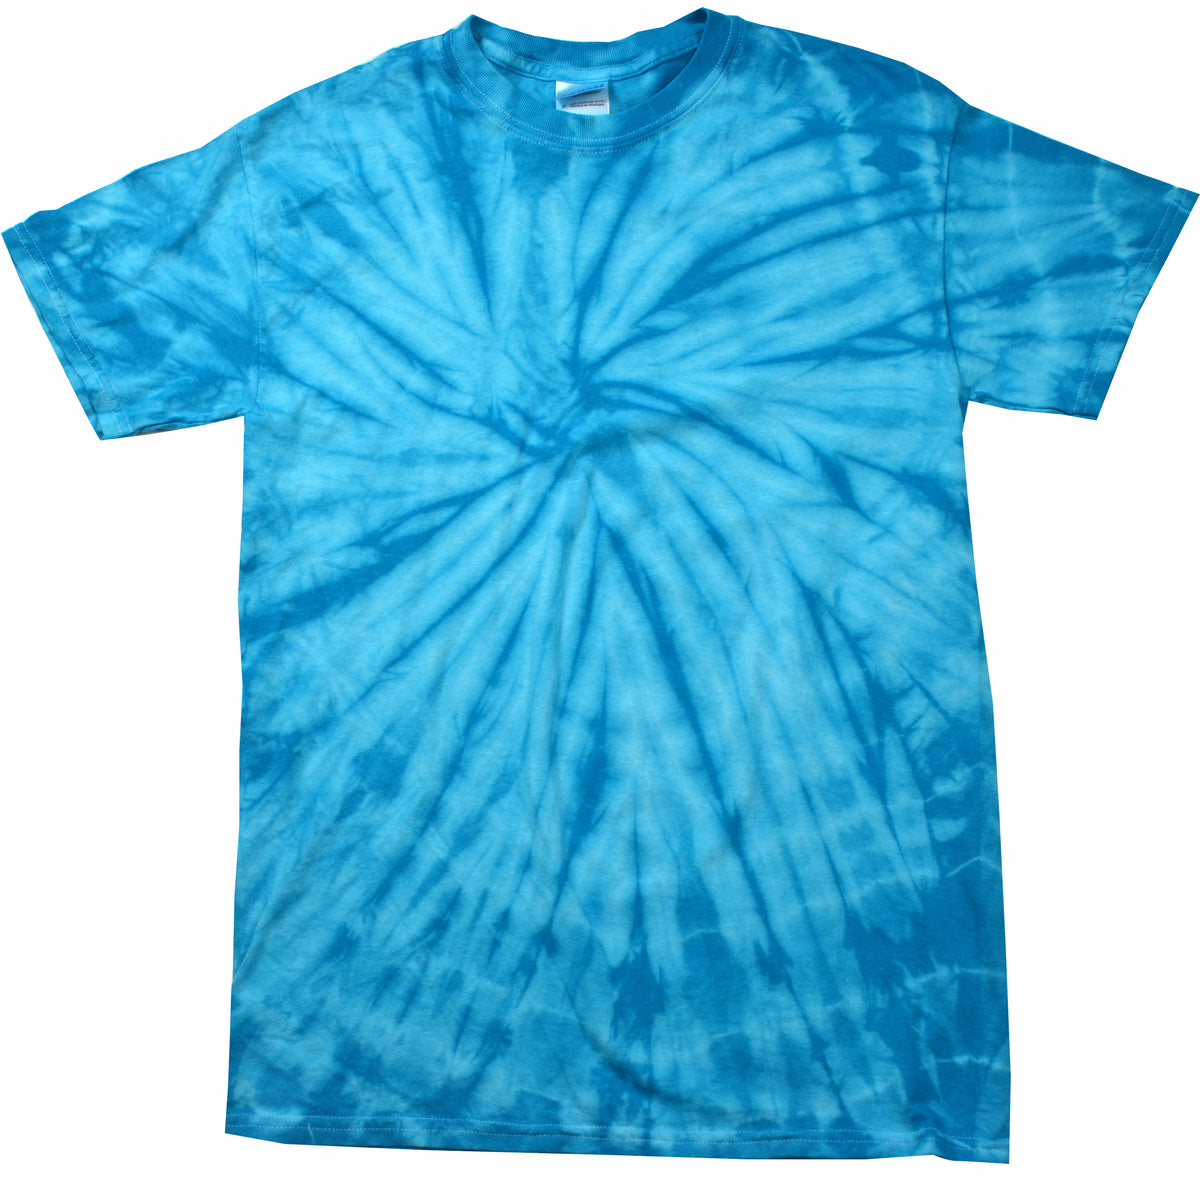 Tie Dye Shirt Multi Color Spider Turquoise T-Shirt